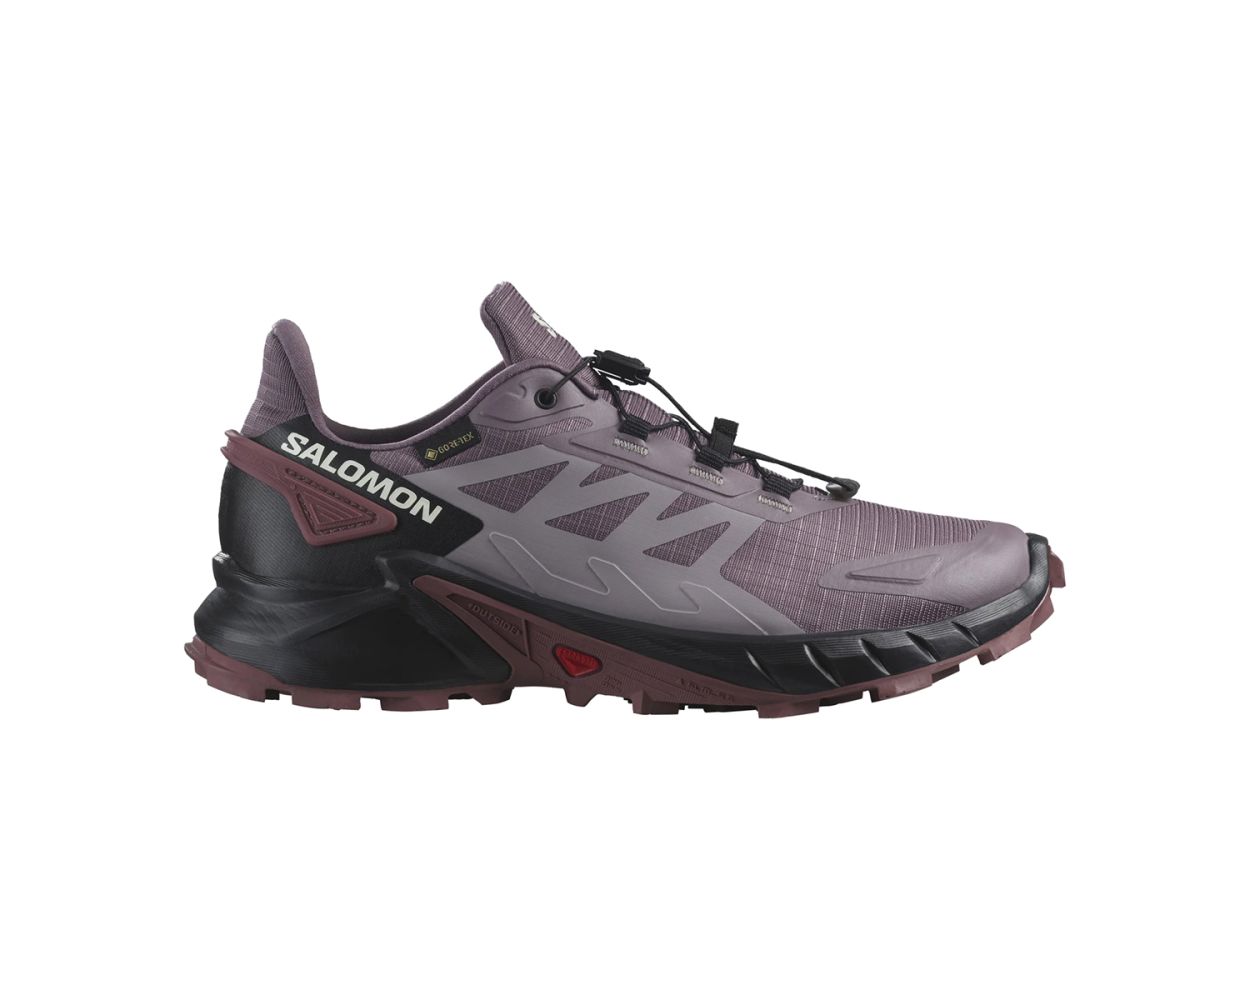 Salomon Supercross Gore-Tex Women's Trail Running Shoes in Moonscape/Black/Wild Ginger | NEON Canada